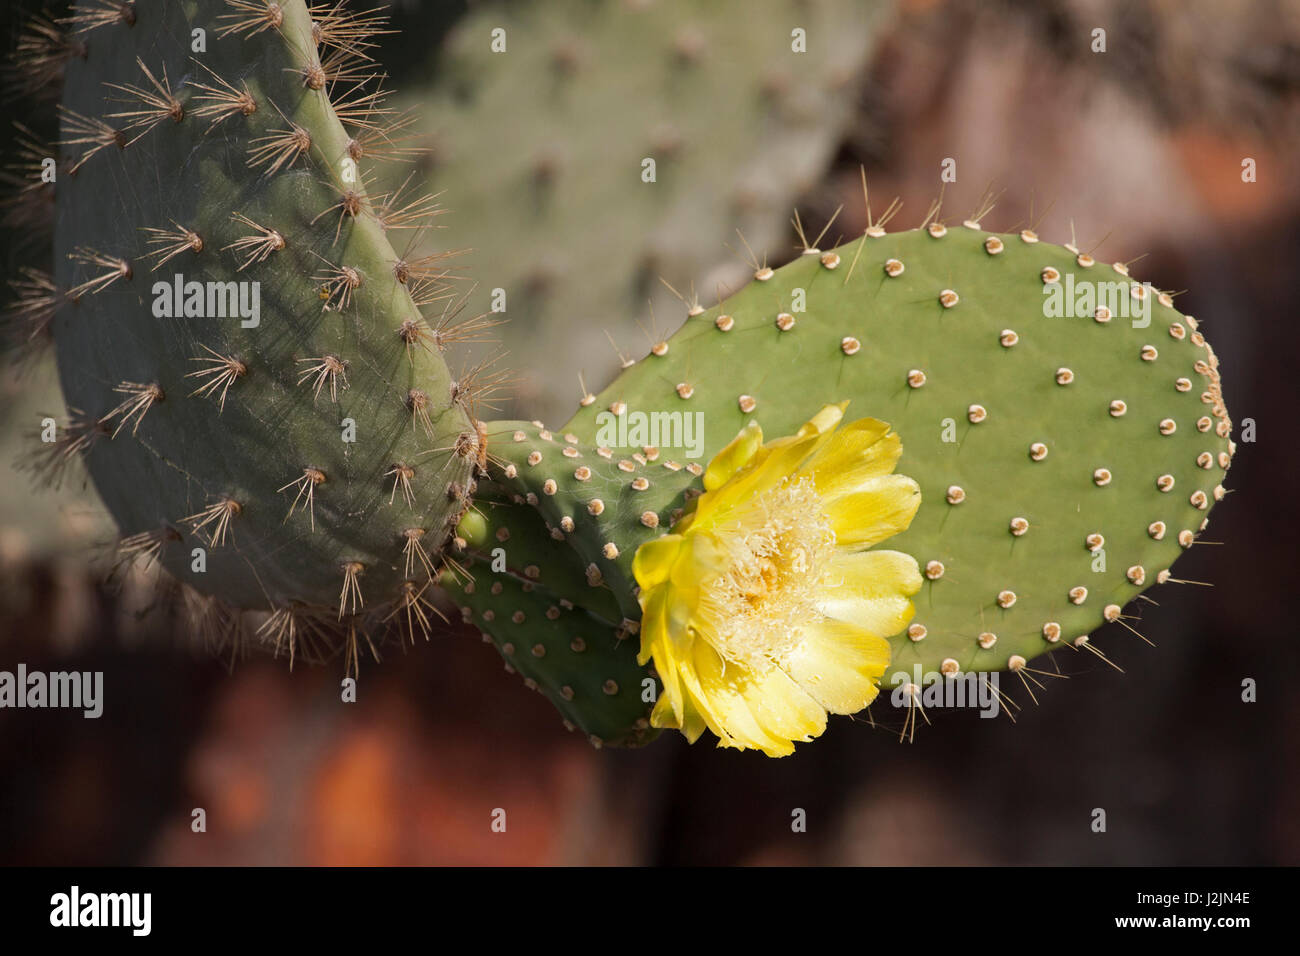 Prickly Pear Cactus flower (Opuntia galapageia) in the Galapagos Islands Stock Photo